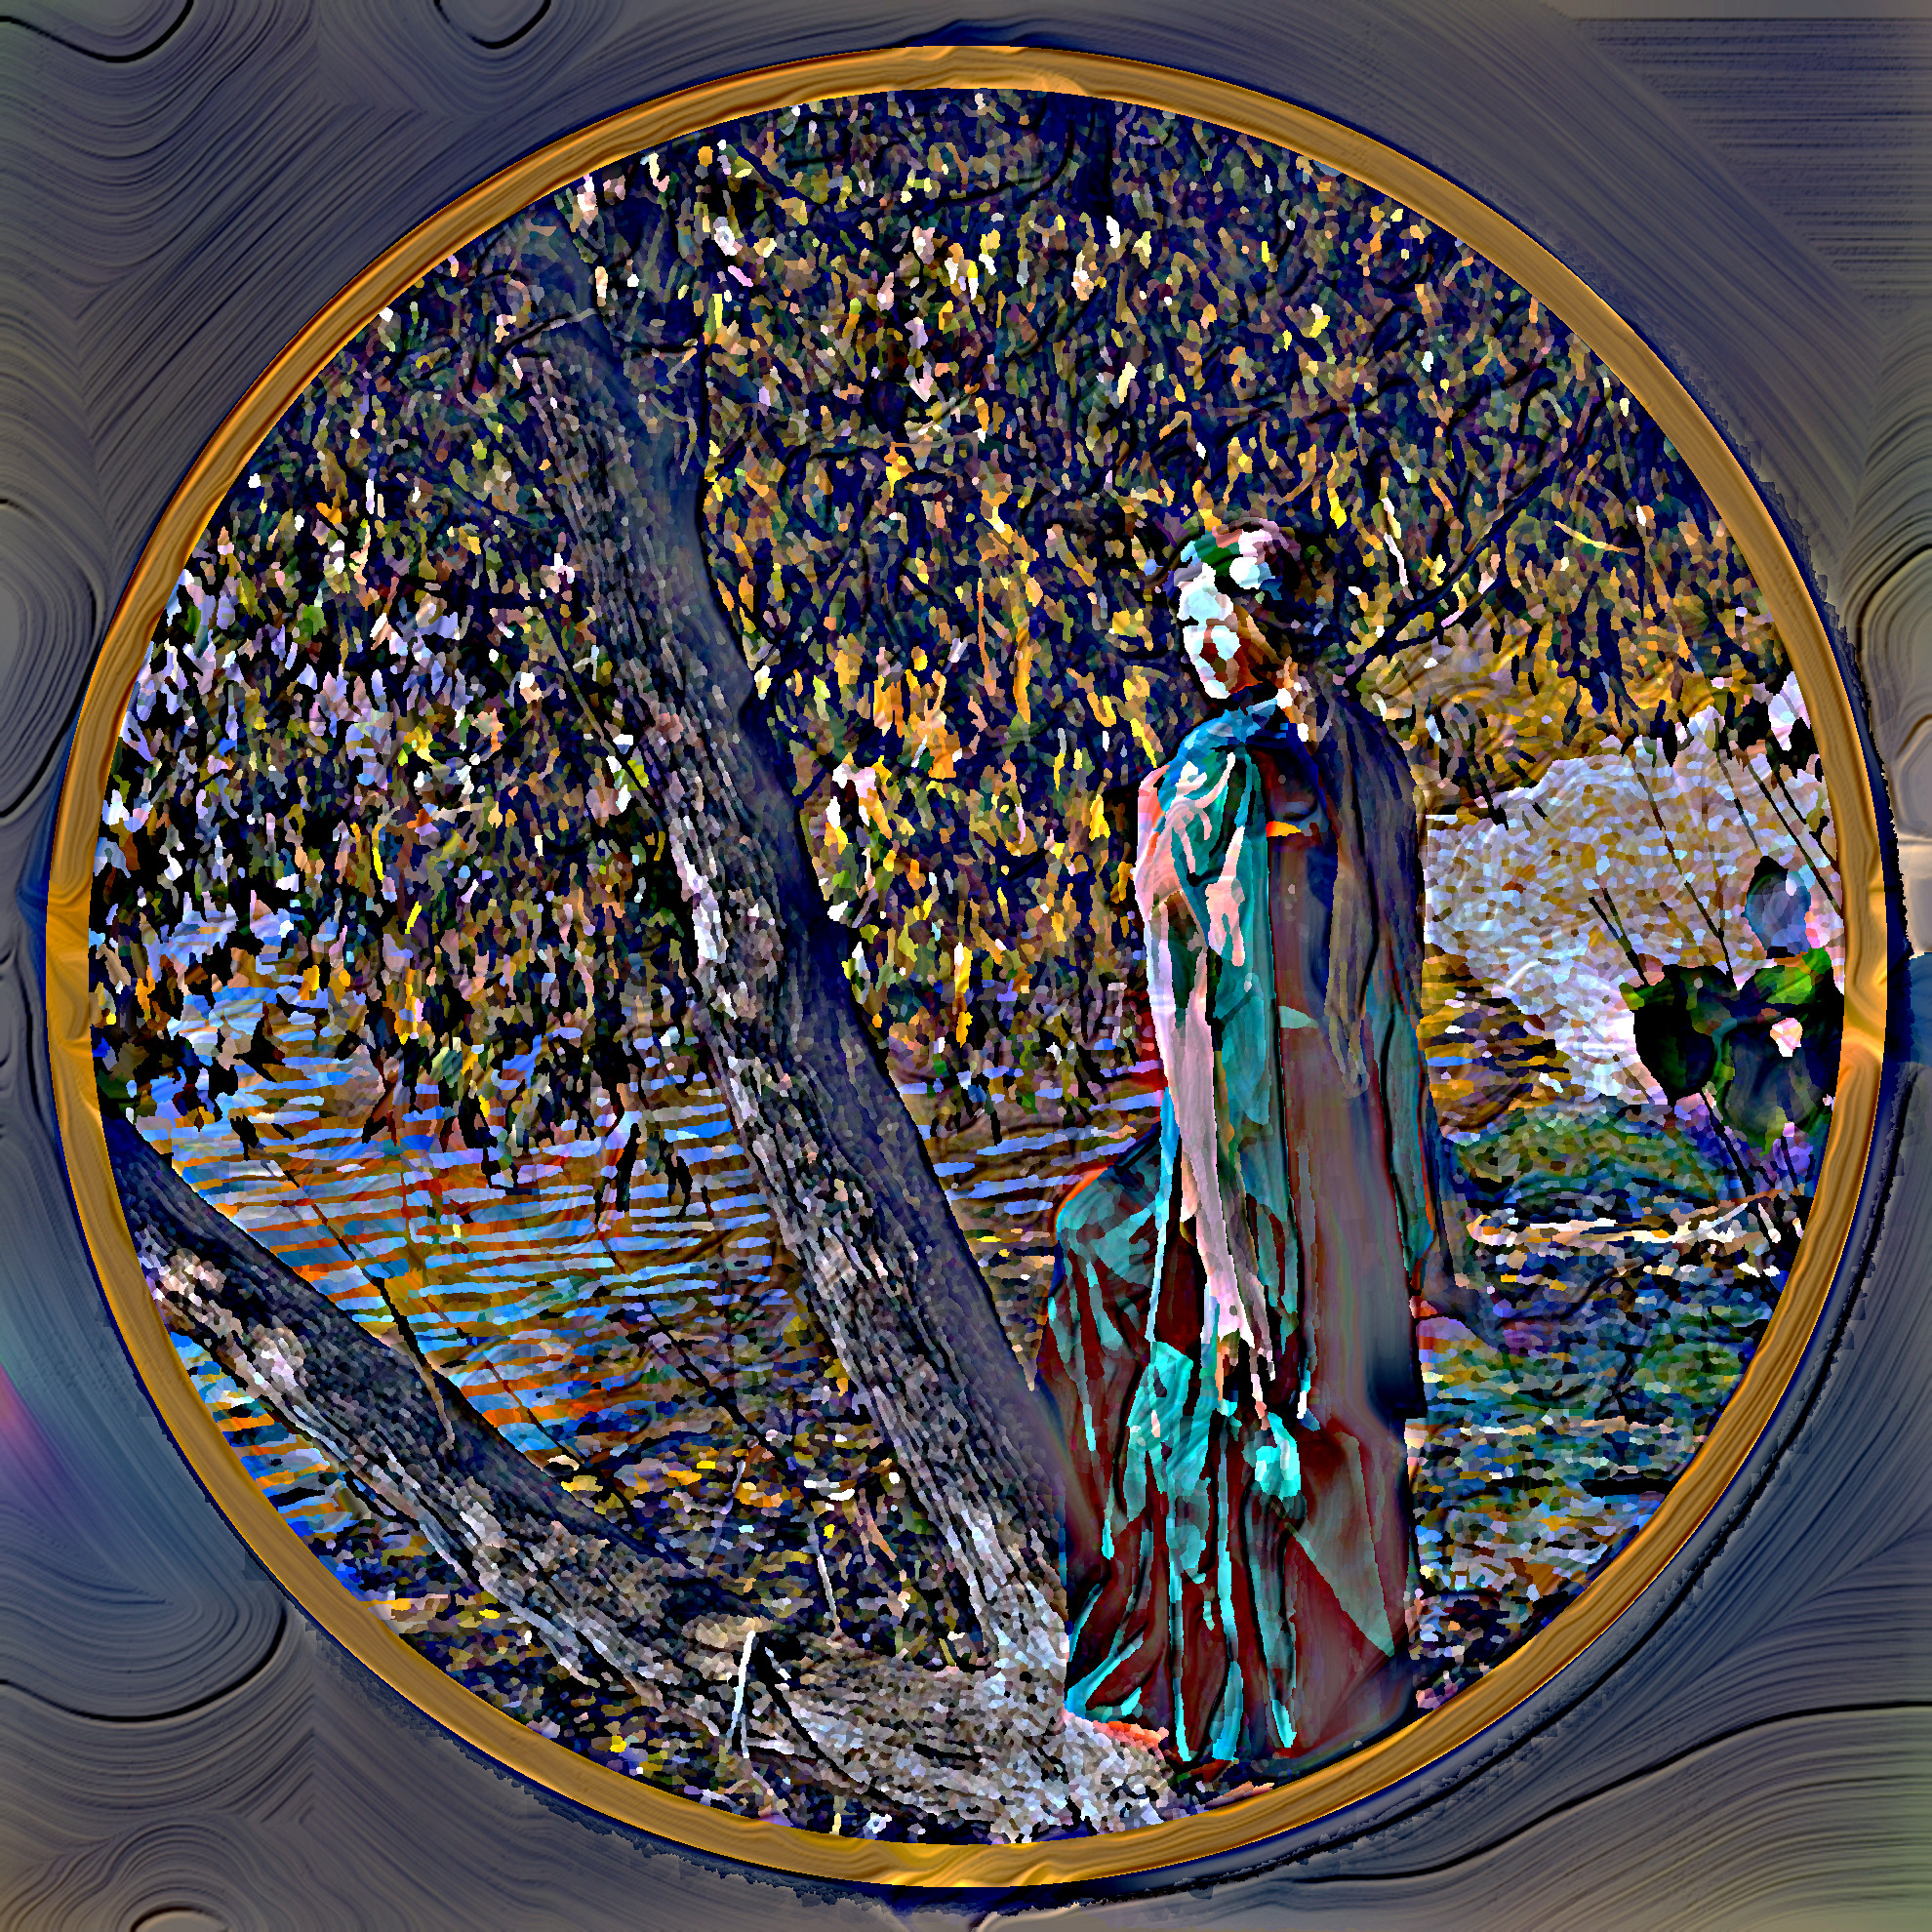 2023-05-26 08-41-44costume__rainy_forest__by_aquilina108_dbytkwu-fullview_portrait with a framed Artistic effect, style FingerPaint.jpg